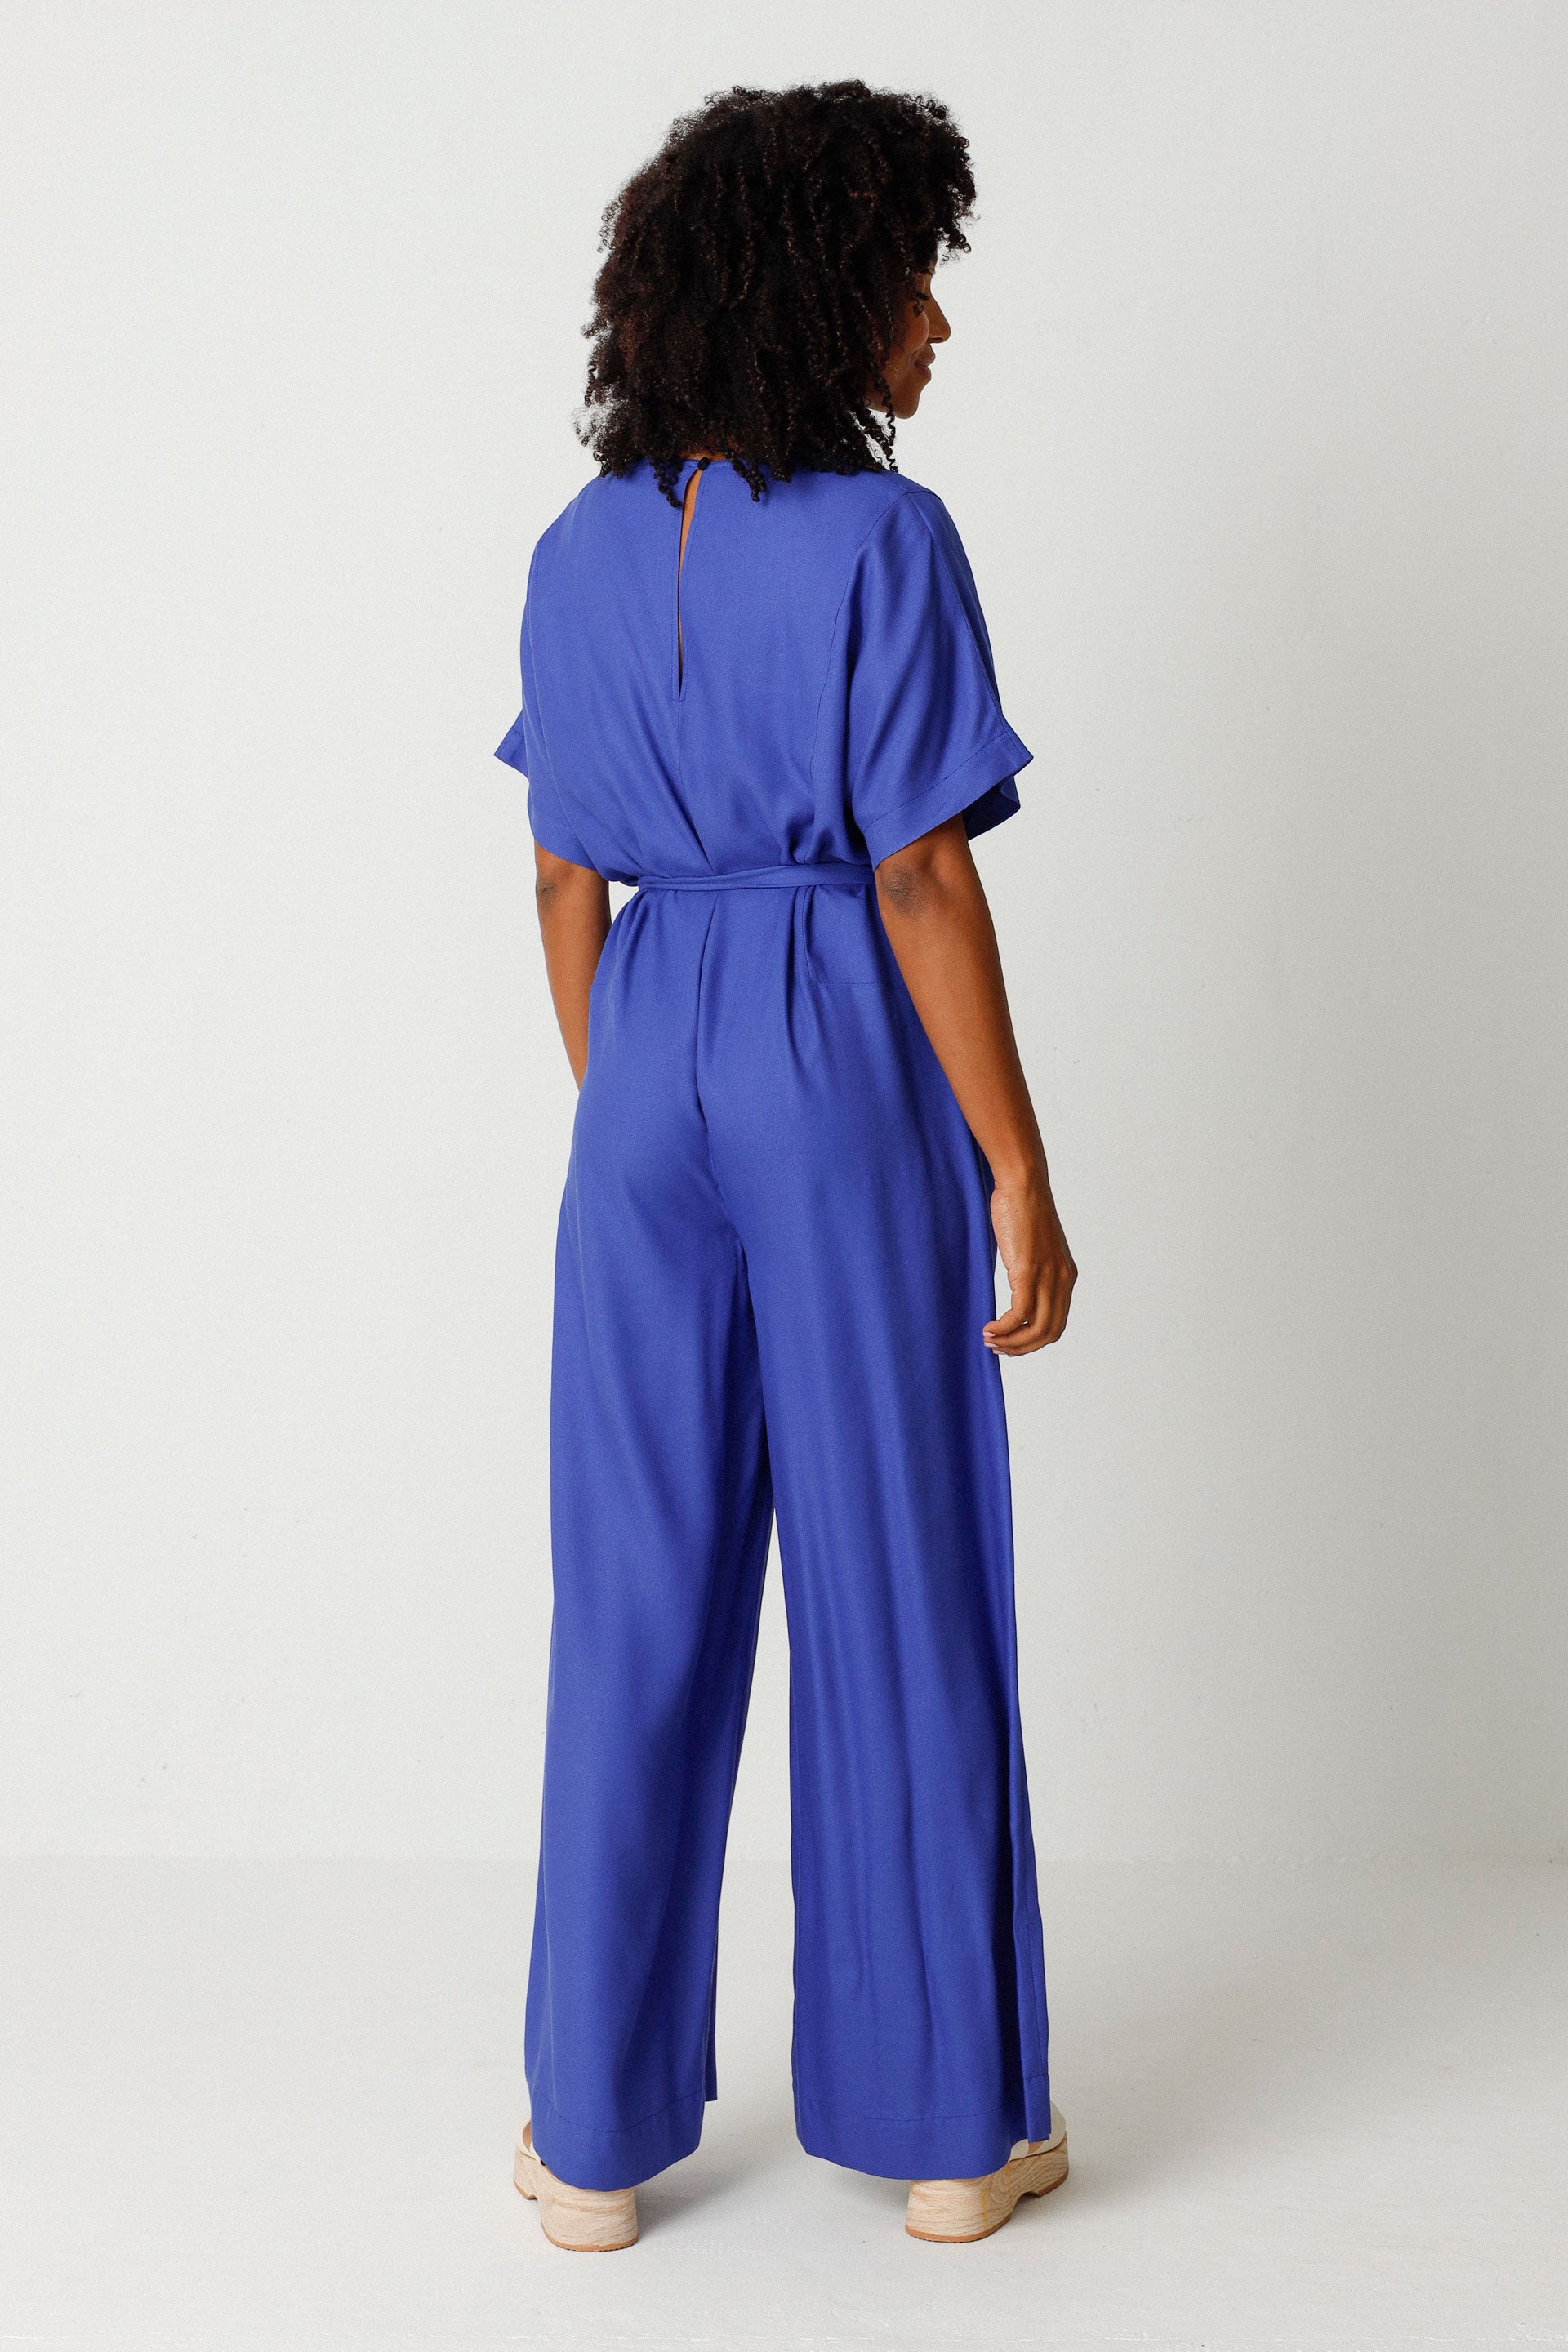 Alaia Jumpsuit in Royal Blue